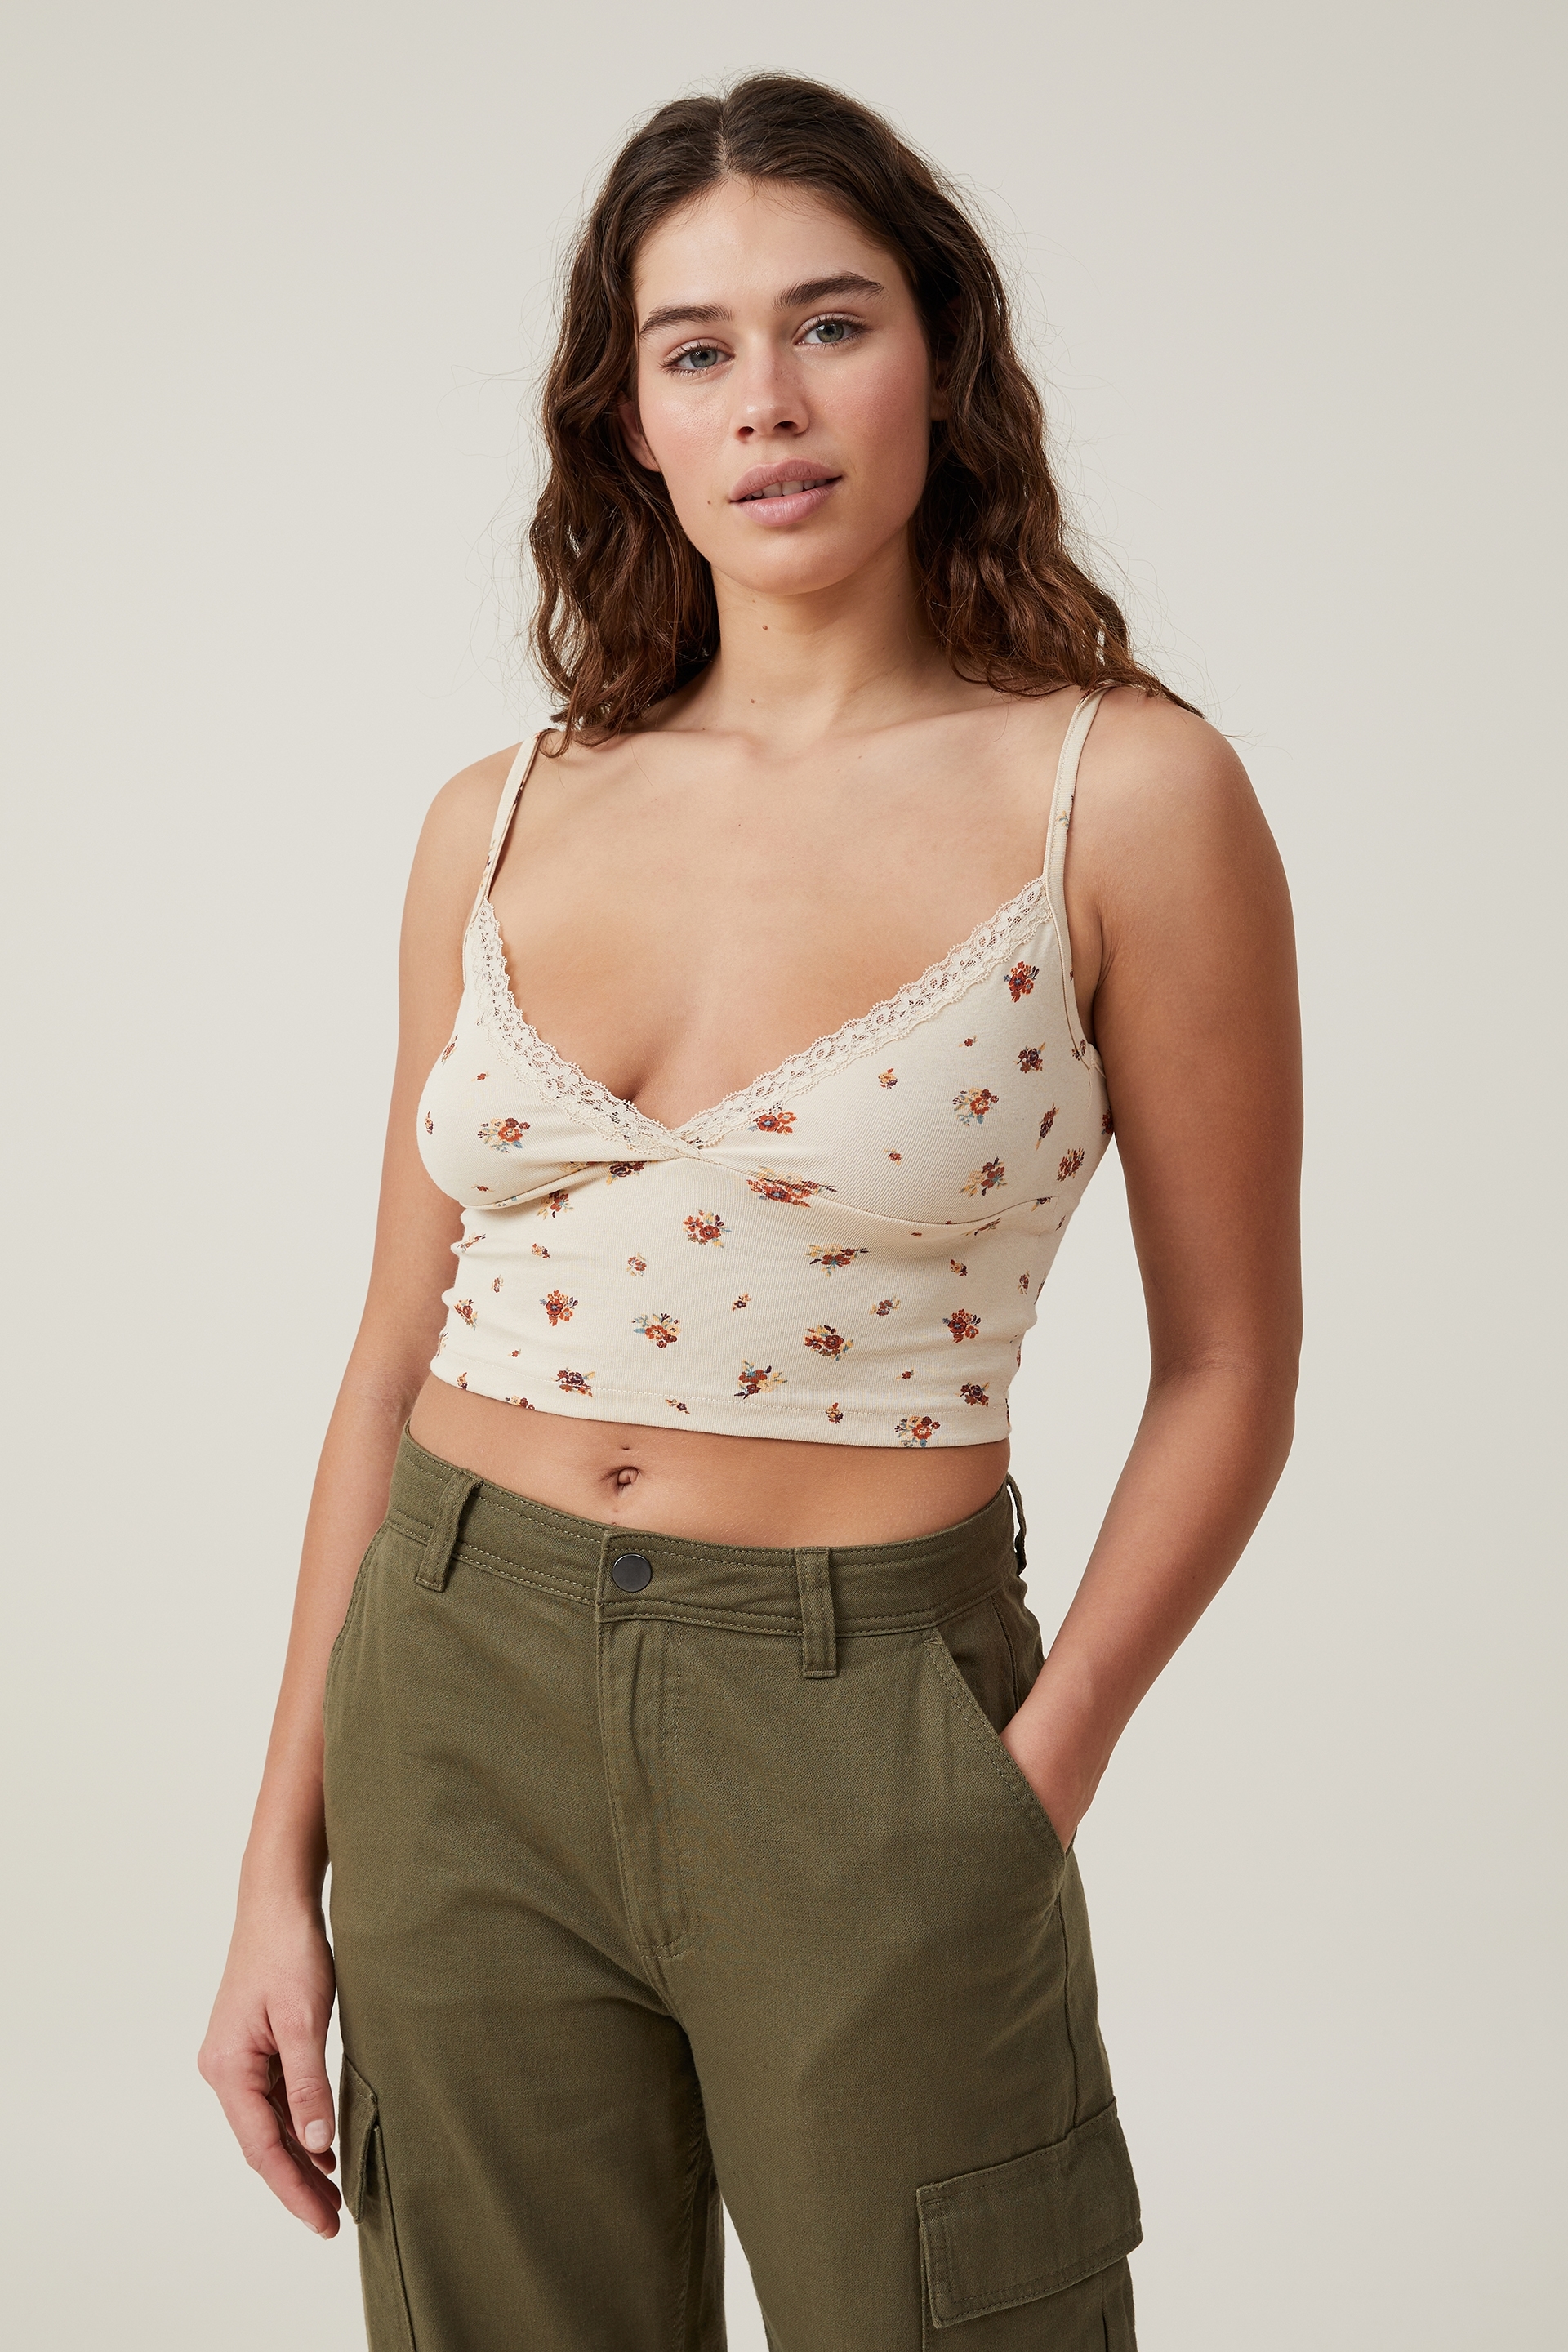 Cotton On Women - Sammie Cross Front Cami - Beth ditsy stone